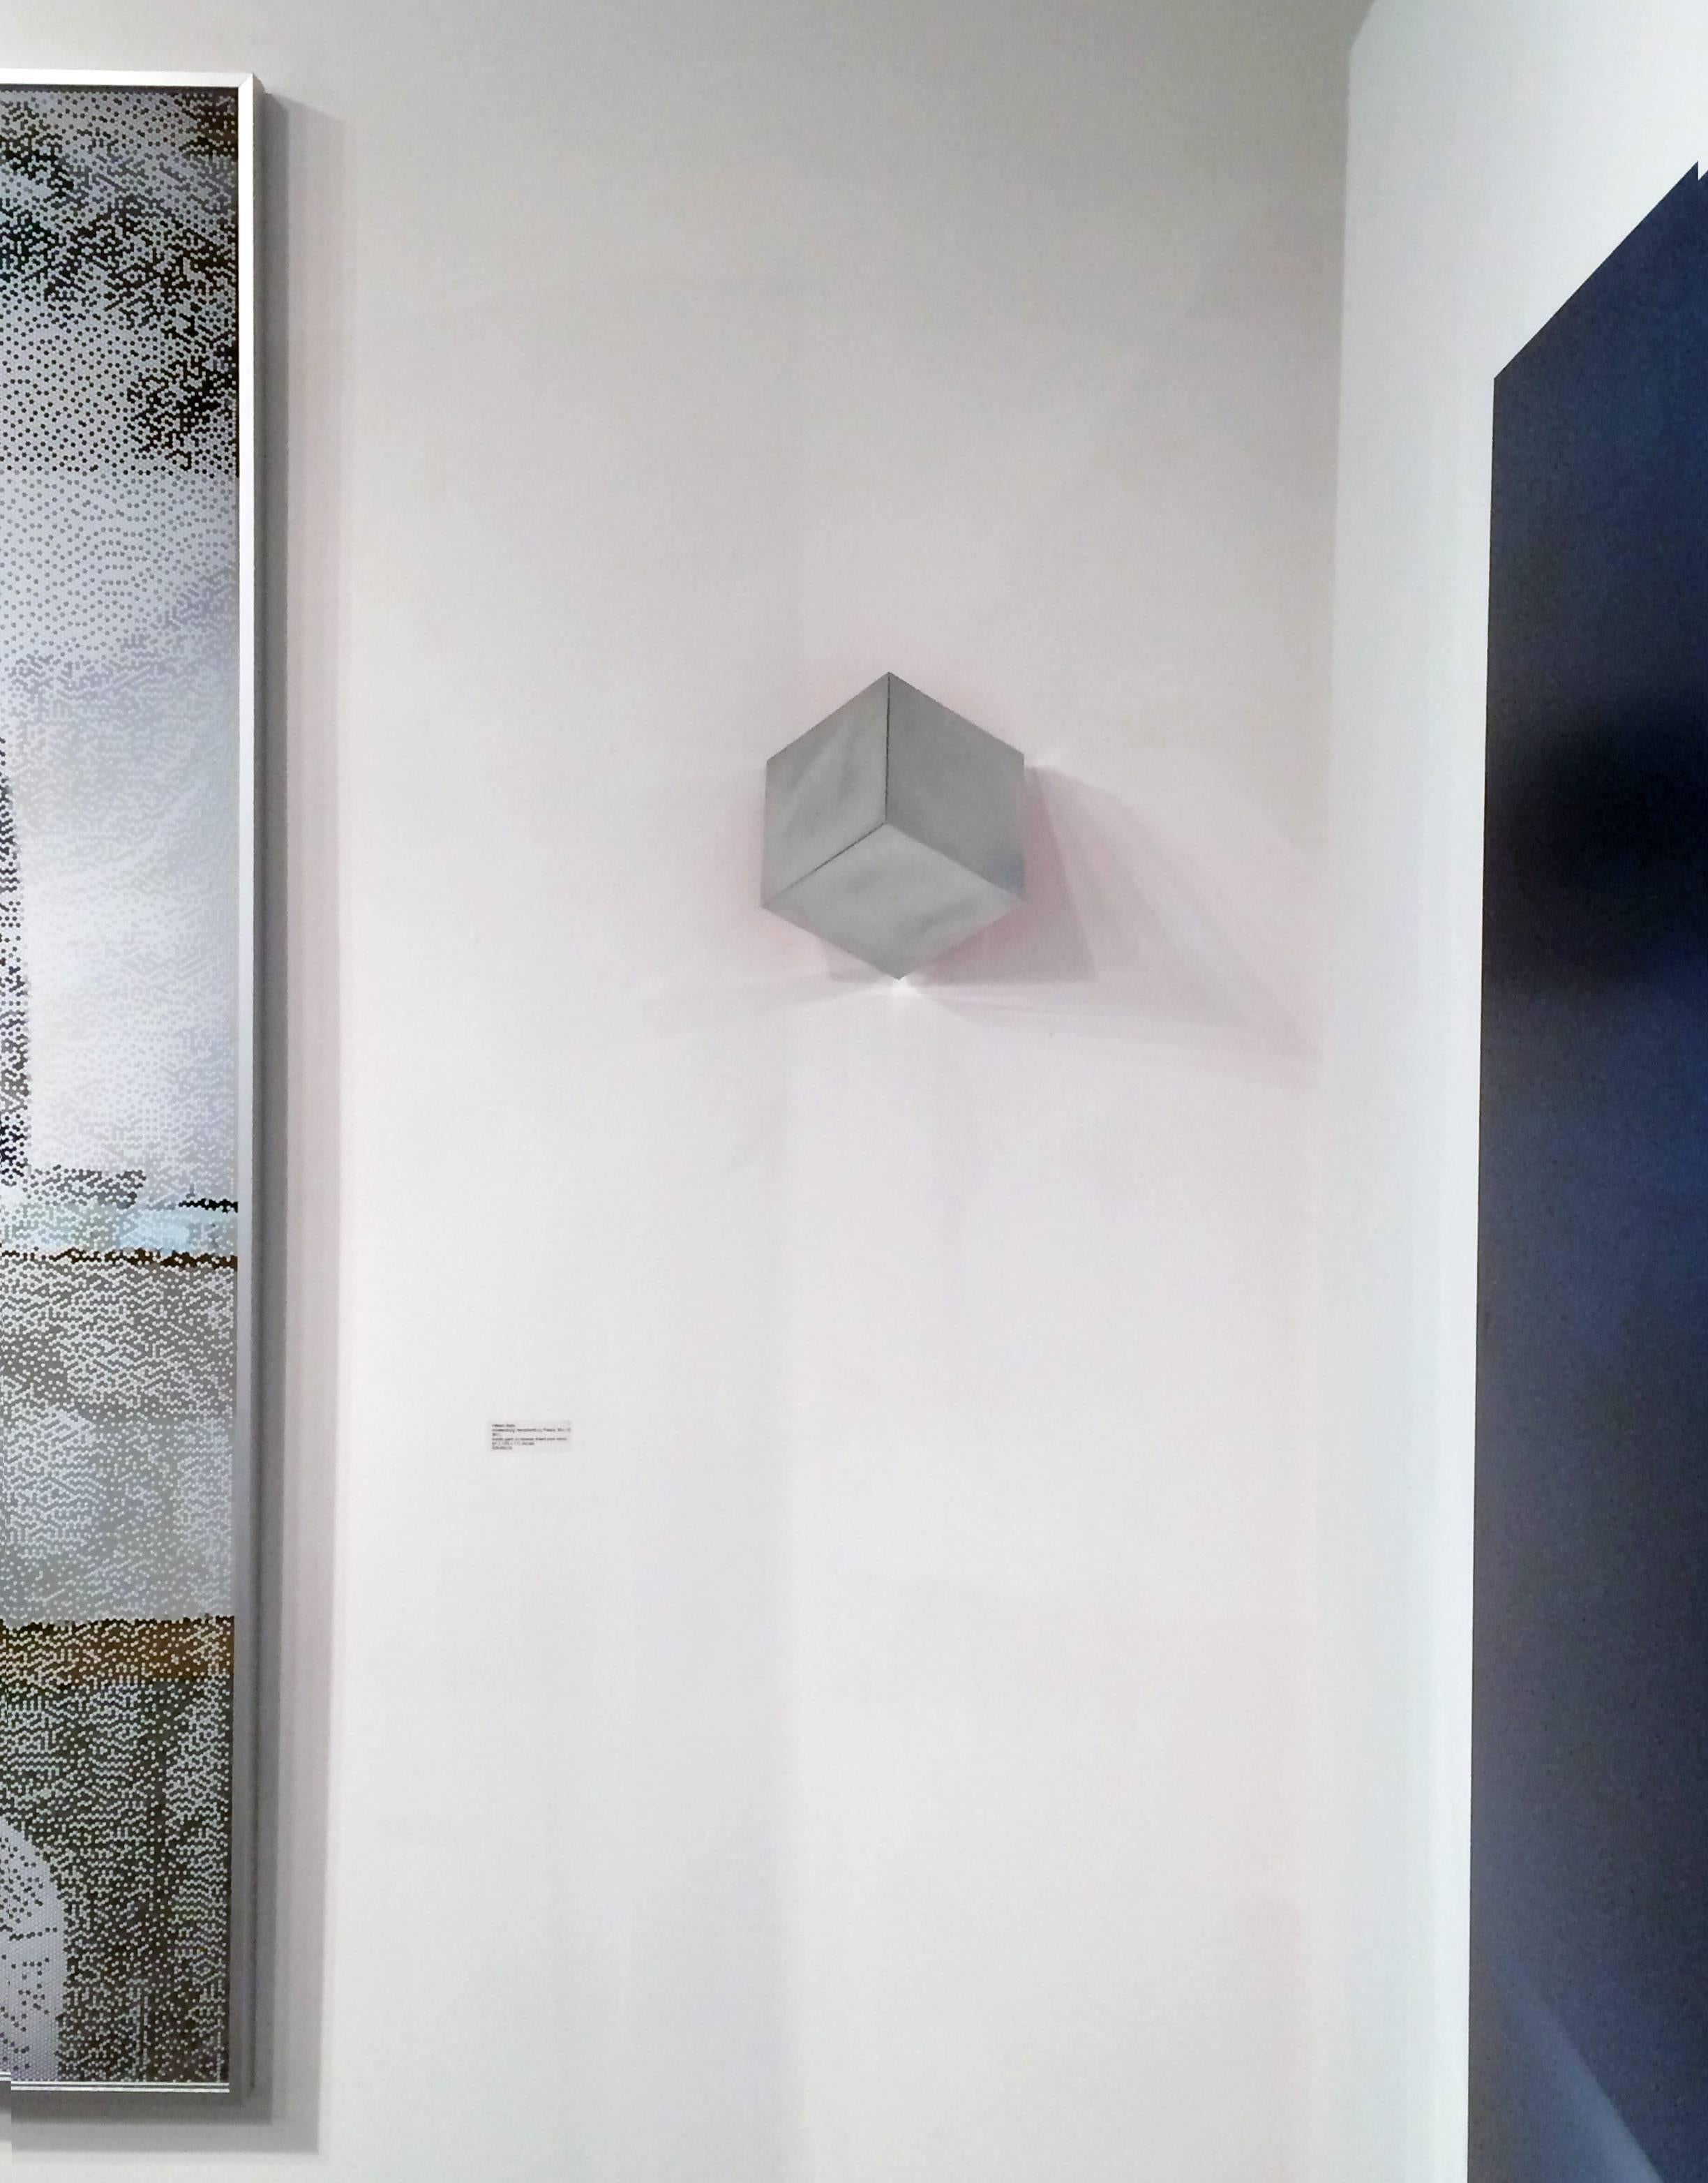 Disappearing Cube - Minimalist Sculpture by Arno Kortschot